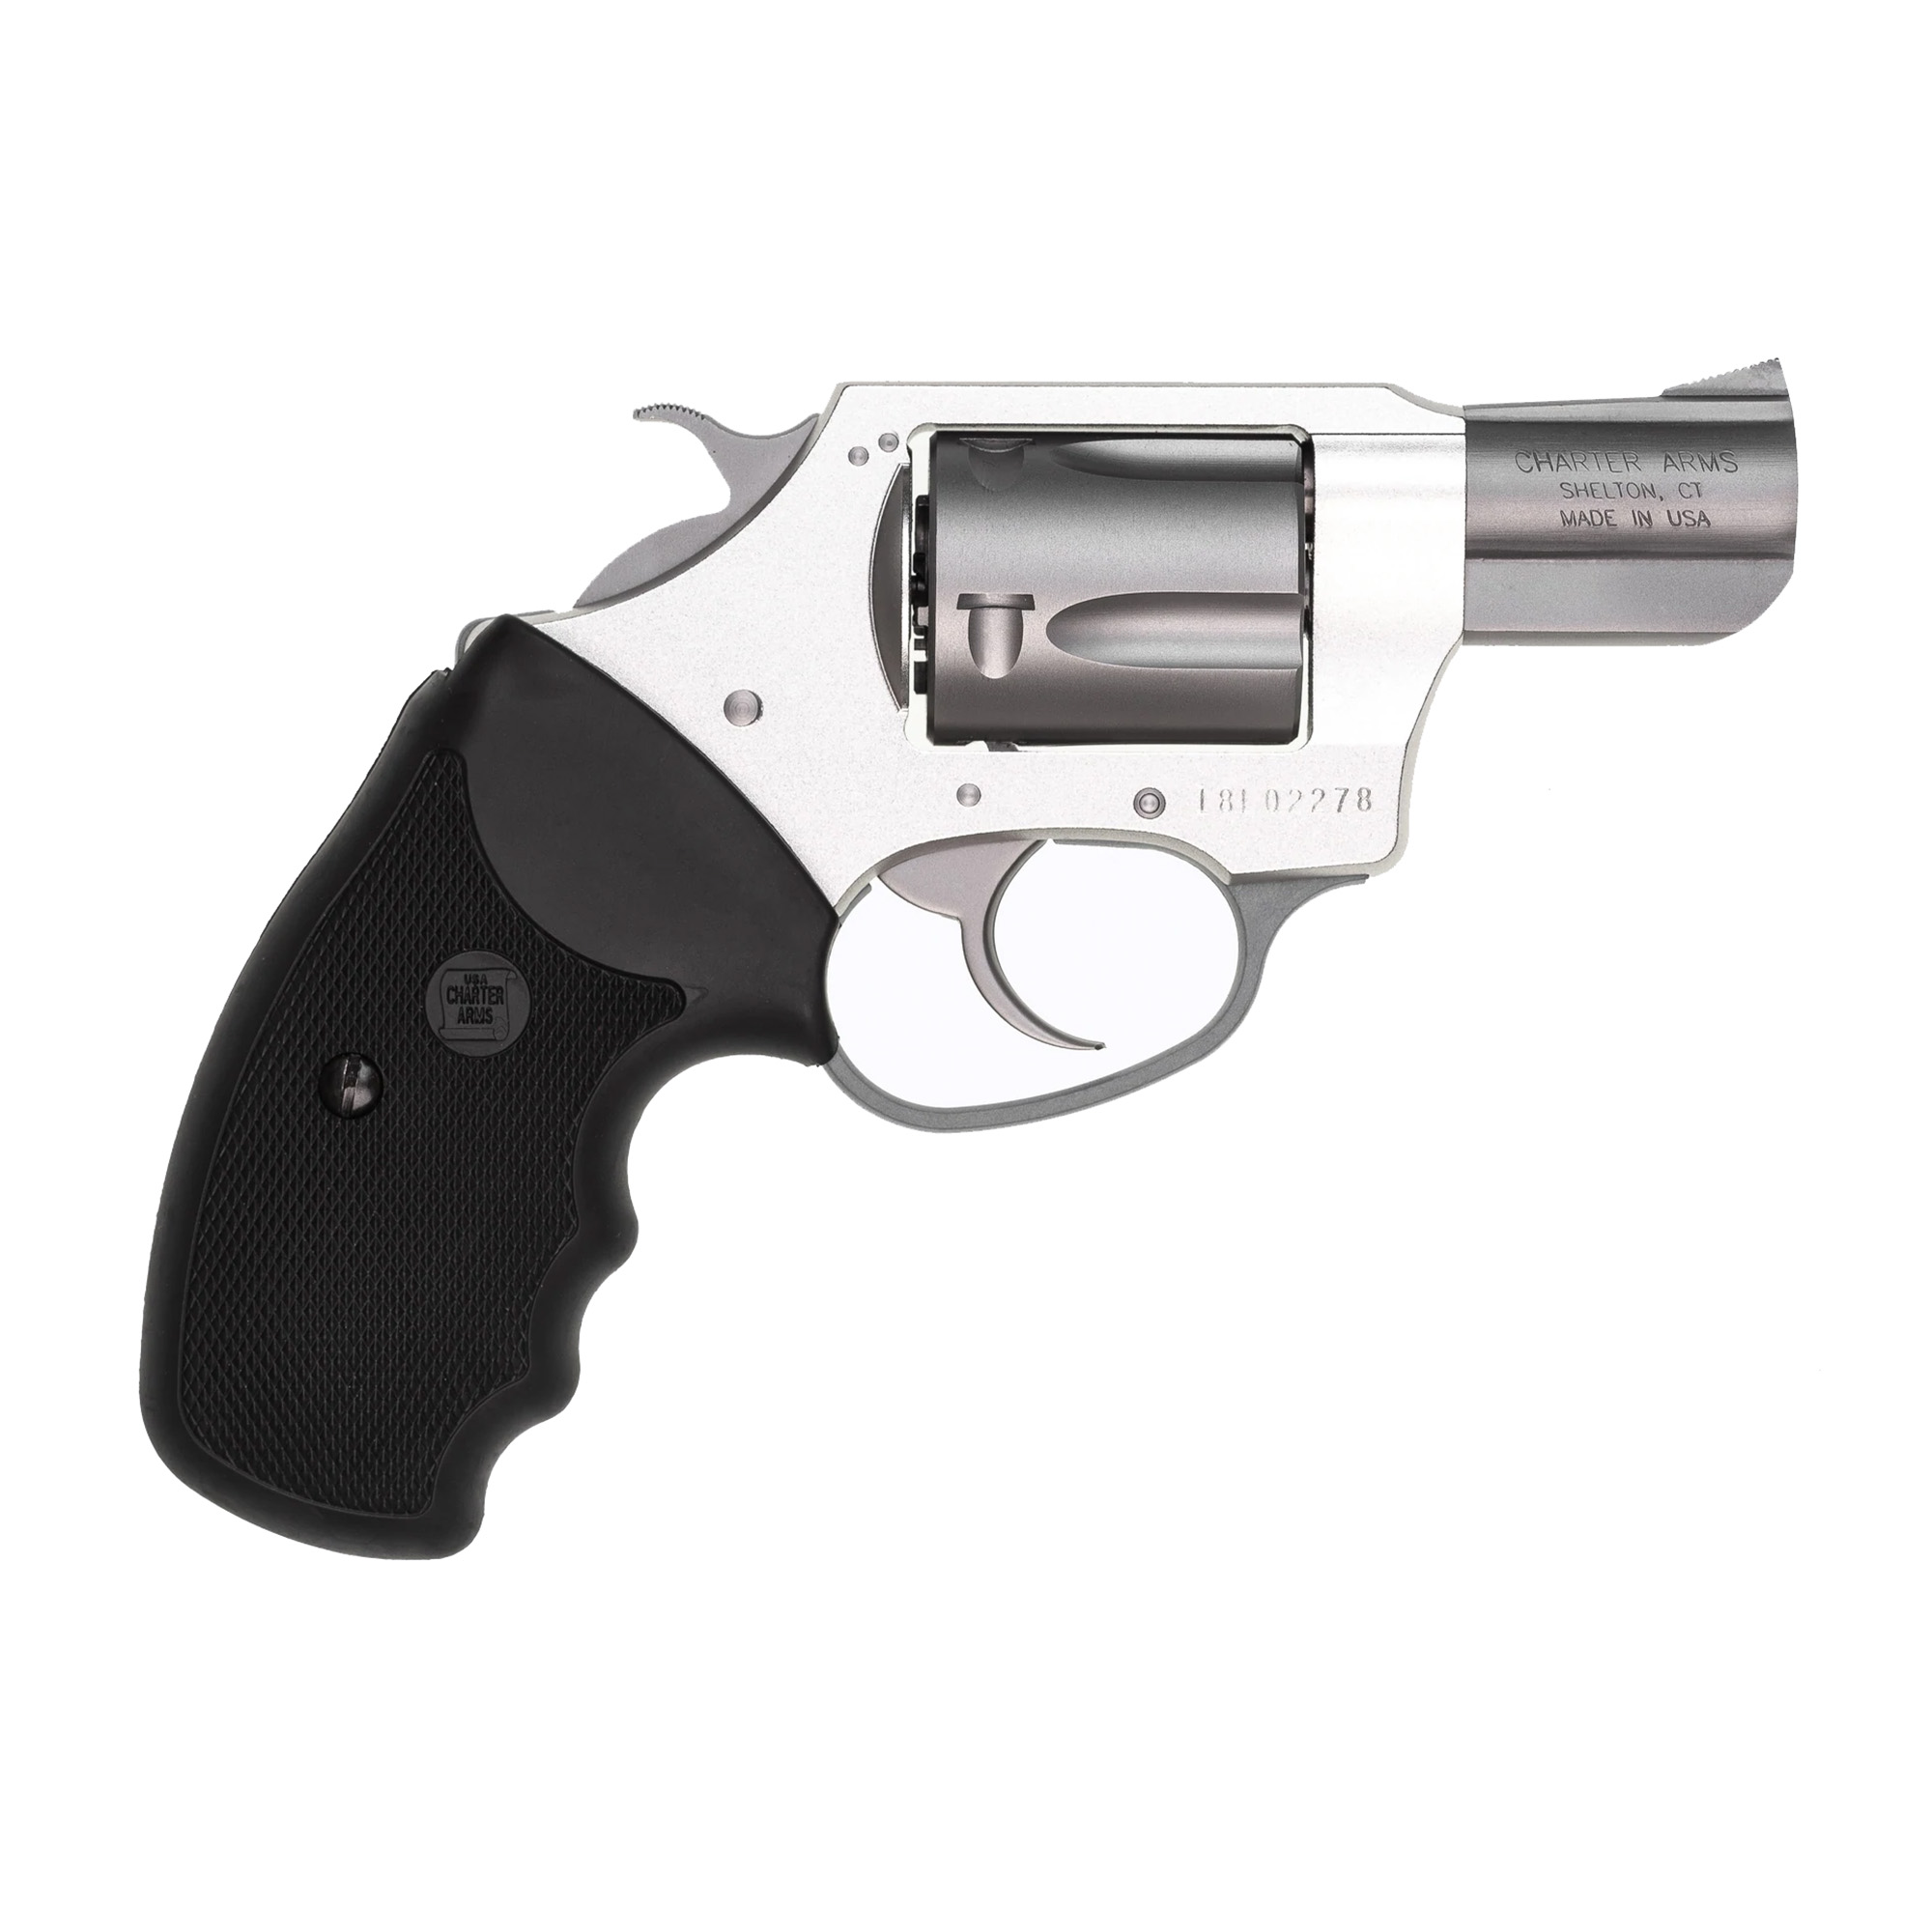 Charter Arms, Undercover, Ultra Lite, Revolver, 38 Special, 2" Barrel, Aluminum, Rubber Grips, Fixed Sights, 5 Rounds